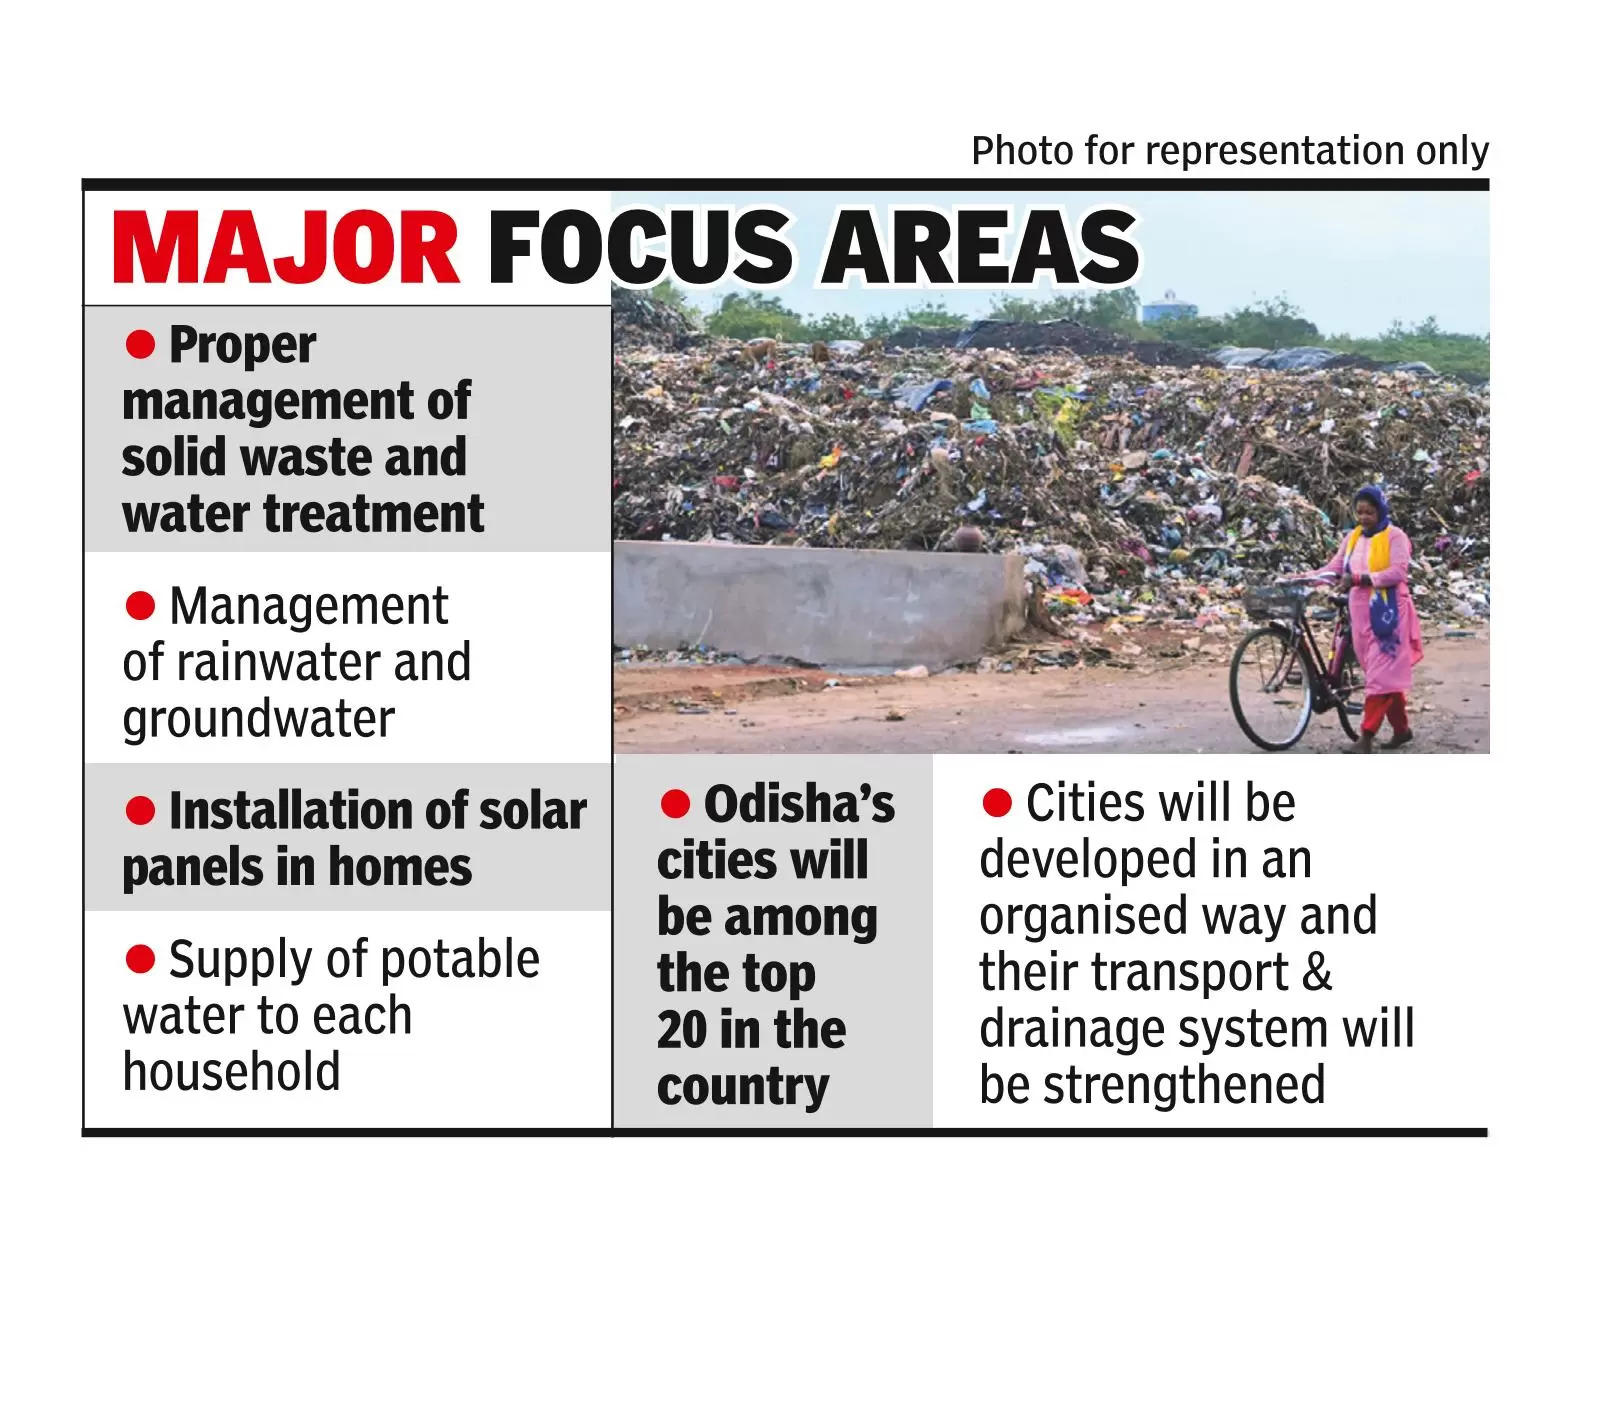 Will clear garbage hill in city if voted to power: BJP pledge